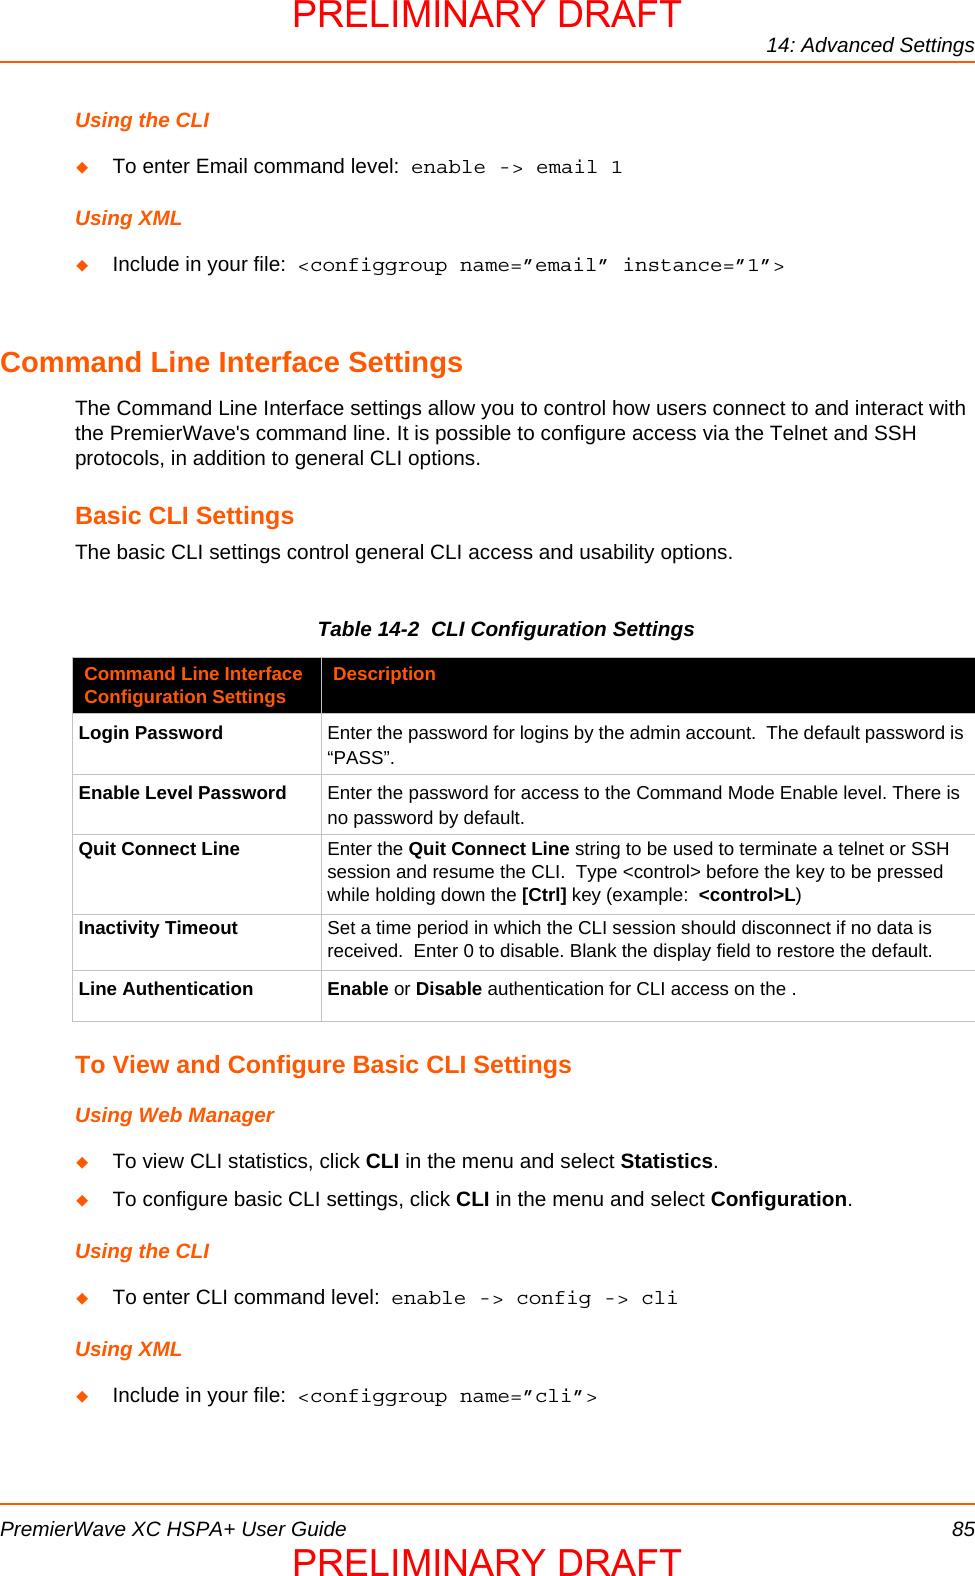 14: Advanced SettingsPremierWave XC HSPA+ User Guide 85Using the CLITo enter Email command level:  enable -&gt; email 1Using XMLInclude in your file:  &lt;configgroup name=”email” instance=”1”&gt;Command Line Interface SettingsThe Command Line Interface settings allow you to control how users connect to and interact with the PremierWave&apos;s command line. It is possible to configure access via the Telnet and SSH protocols, in addition to general CLI options.Basic CLI SettingsThe basic CLI settings control general CLI access and usability options.Table 14-2  CLI Configuration SettingsTo View and Configure Basic CLI SettingsUsing Web ManagerTo view CLI statistics, click CLI in the menu and select Statistics. To configure basic CLI settings, click CLI in the menu and select Configuration.Using the CLITo enter CLI command level:  enable -&gt; config -&gt; cliUsing XMLInclude in your file:  &lt;configgroup name=”cli”&gt;Command Line Interface Configuration Settings DescriptionLogin Password Enter the password for logins by the admin account.  The default password is “PASS”.Enable Level Password Enter the password for access to the Command Mode Enable level. There is no password by default.Quit Connect Line Enter the Quit Connect Line string to be used to terminate a telnet or SSH session and resume the CLI.  Type &lt;control&gt; before the key to be pressed while holding down the [Ctrl] key (example:  &lt;control&gt;L)Inactivity Timeout Set a time period in which the CLI session should disconnect if no data is received.  Enter 0 to disable. Blank the display field to restore the default.Line Authentication Enable or Disable authentication for CLI access on the .PRELIMINARY DRAFTPRELIMINARY DRAFT